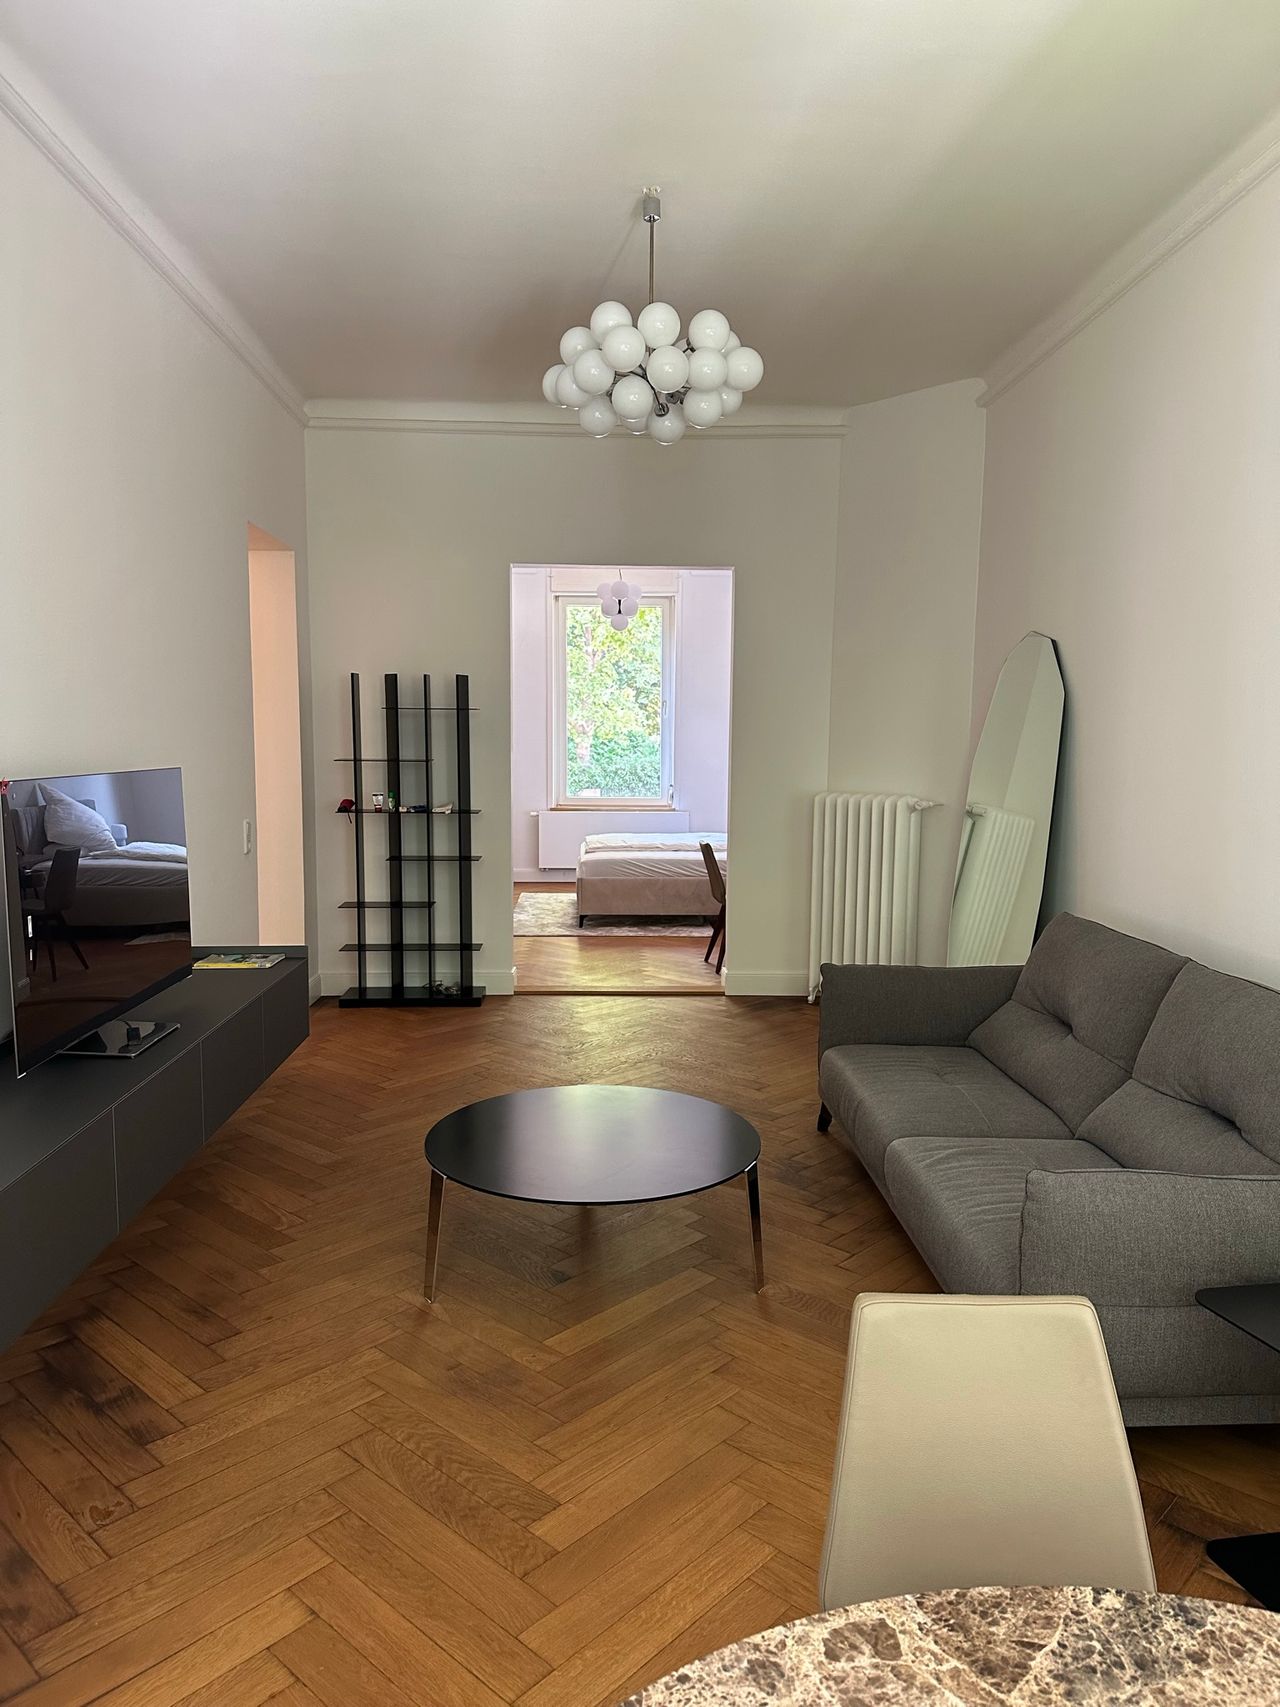 Fully furnished 2-room apartment in the heart of Frankfurt Nordend, Holzhausenviertel